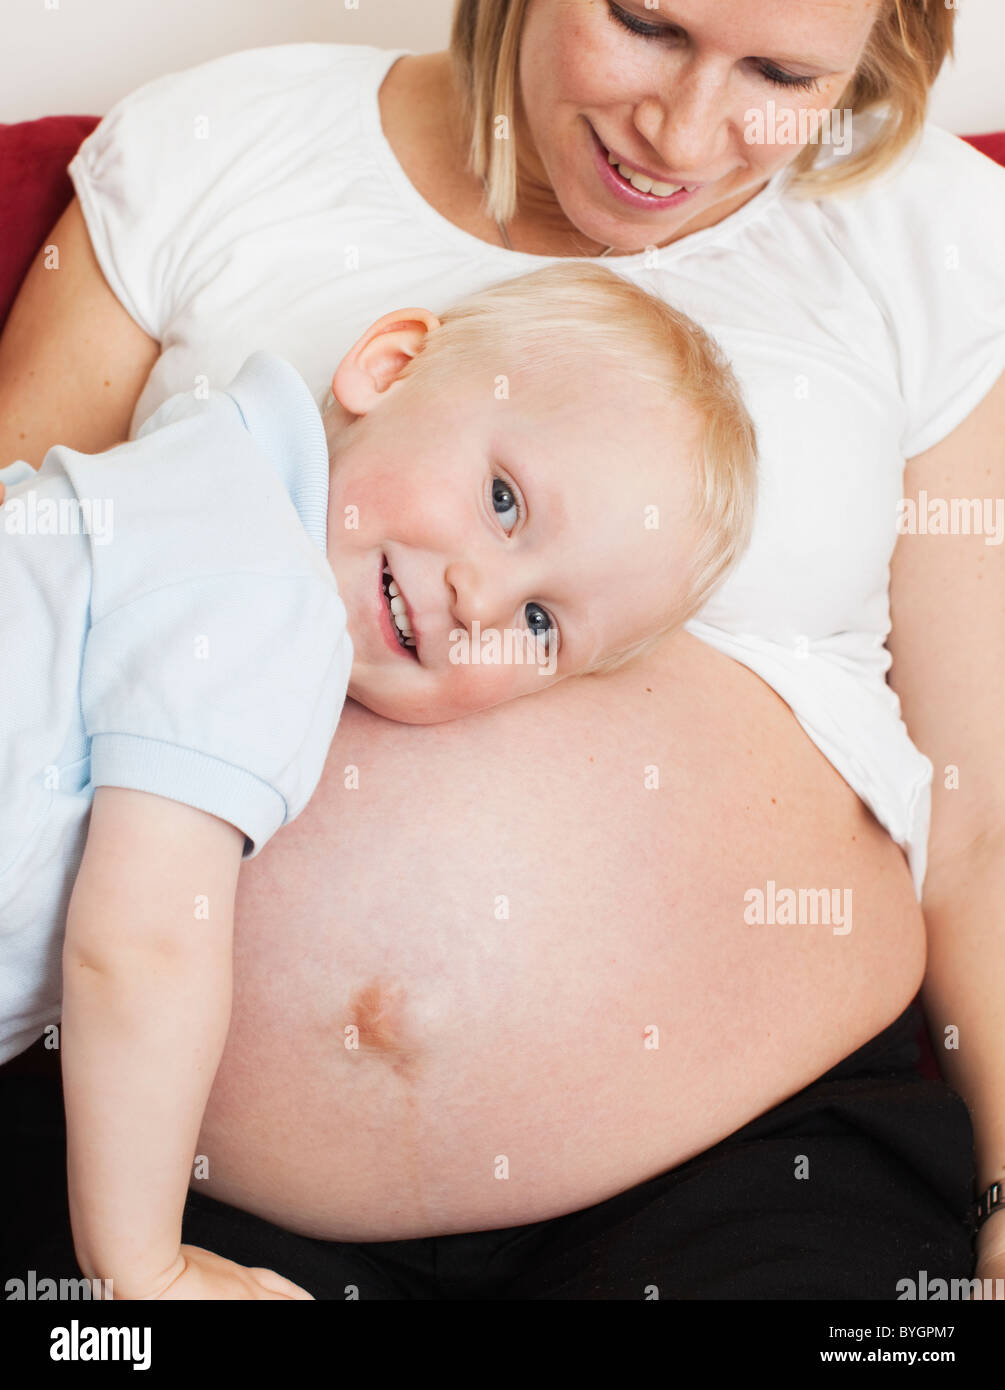 Boy listening to pregnant mothers stomach Stock Photo